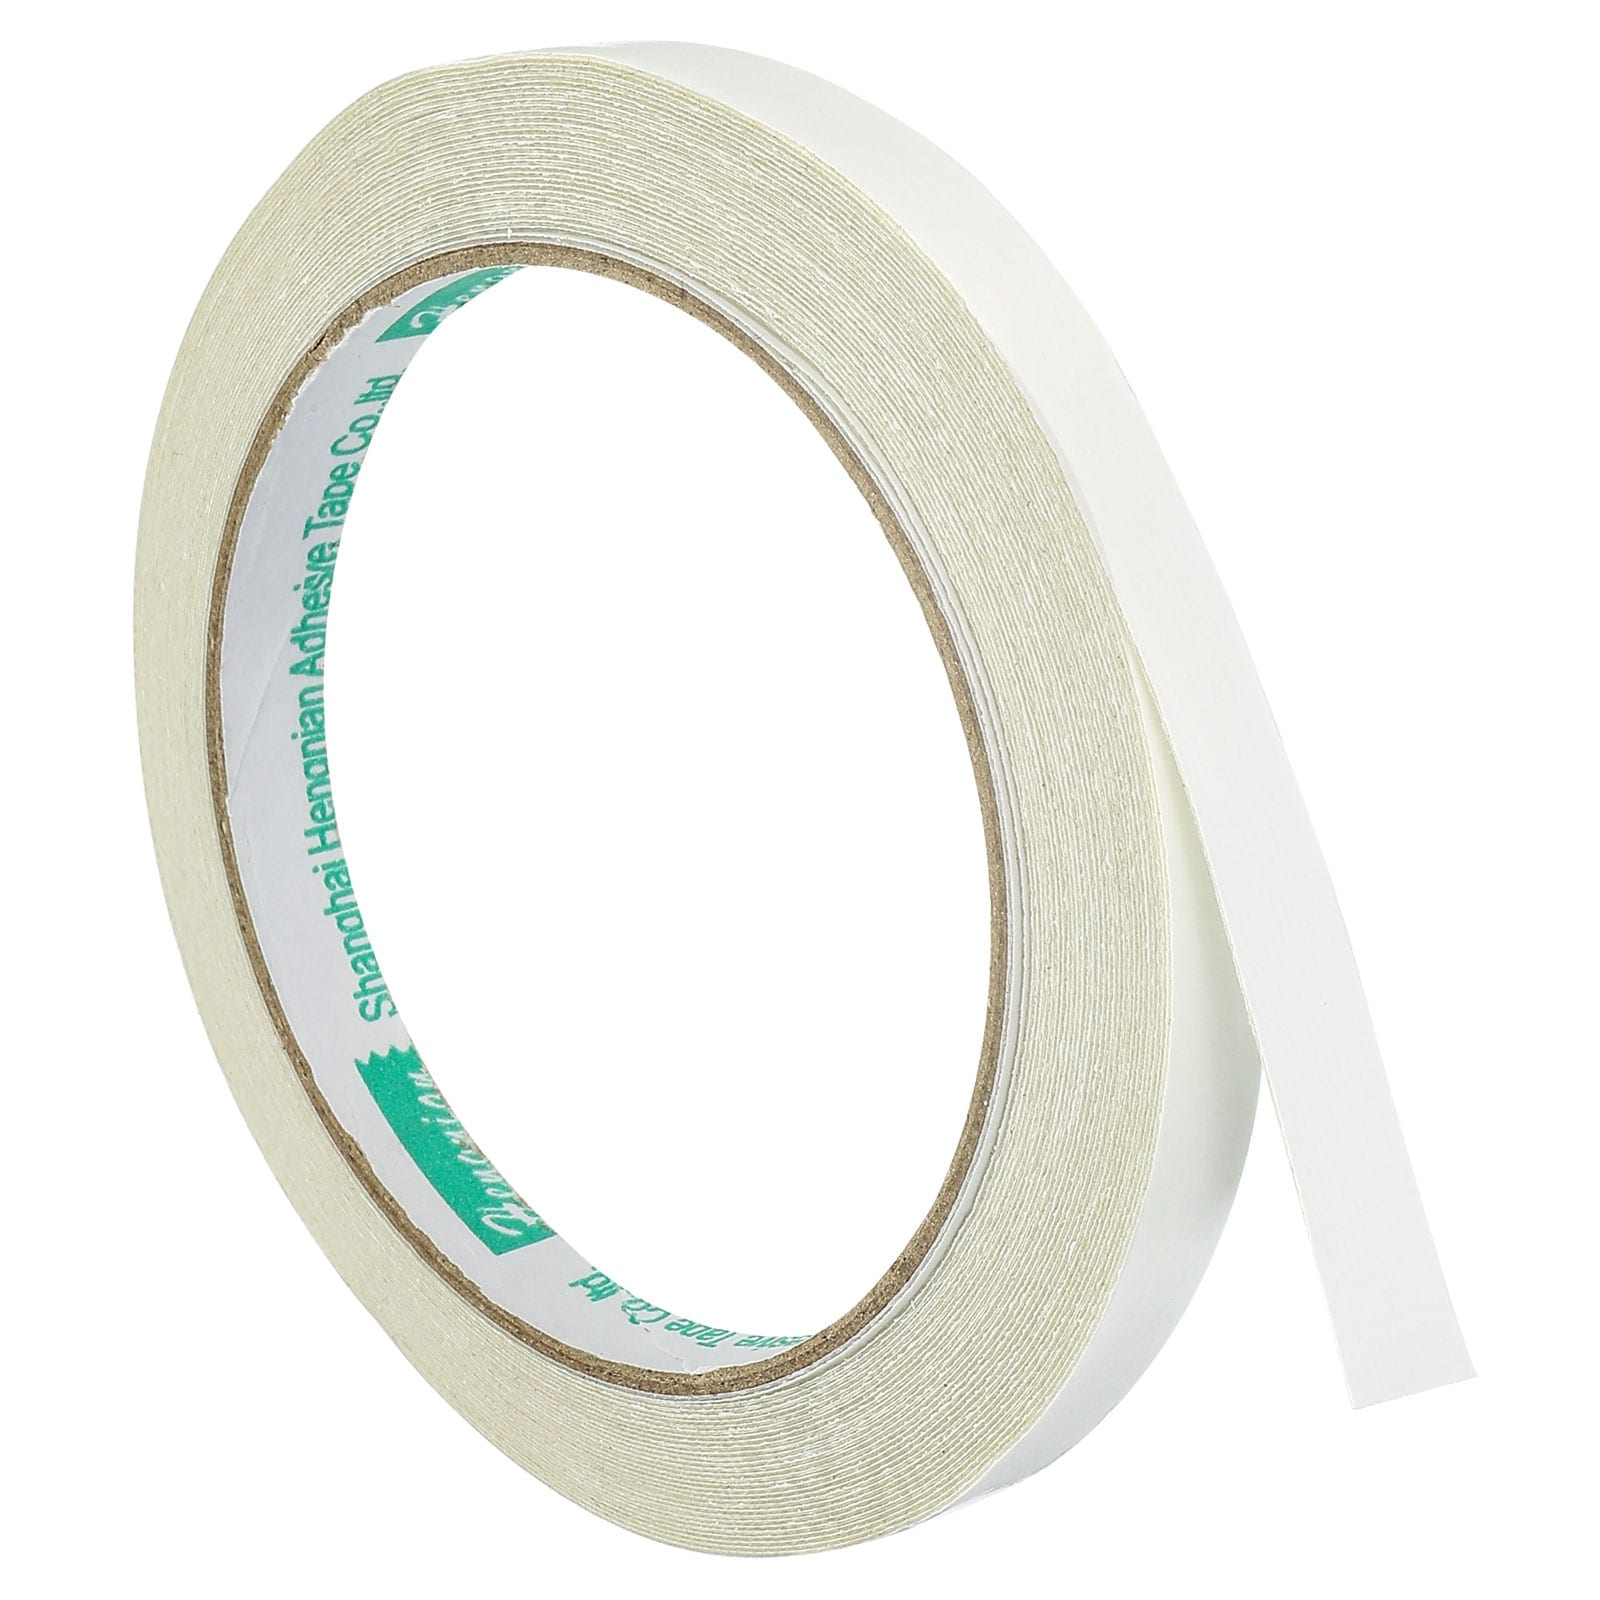 Double Sided Tape-3000x30x2mm Strong Adhesive Mounting Tape for Wall, 2pcs Tape - Transparent - 3000mm x 30mm x 2mm